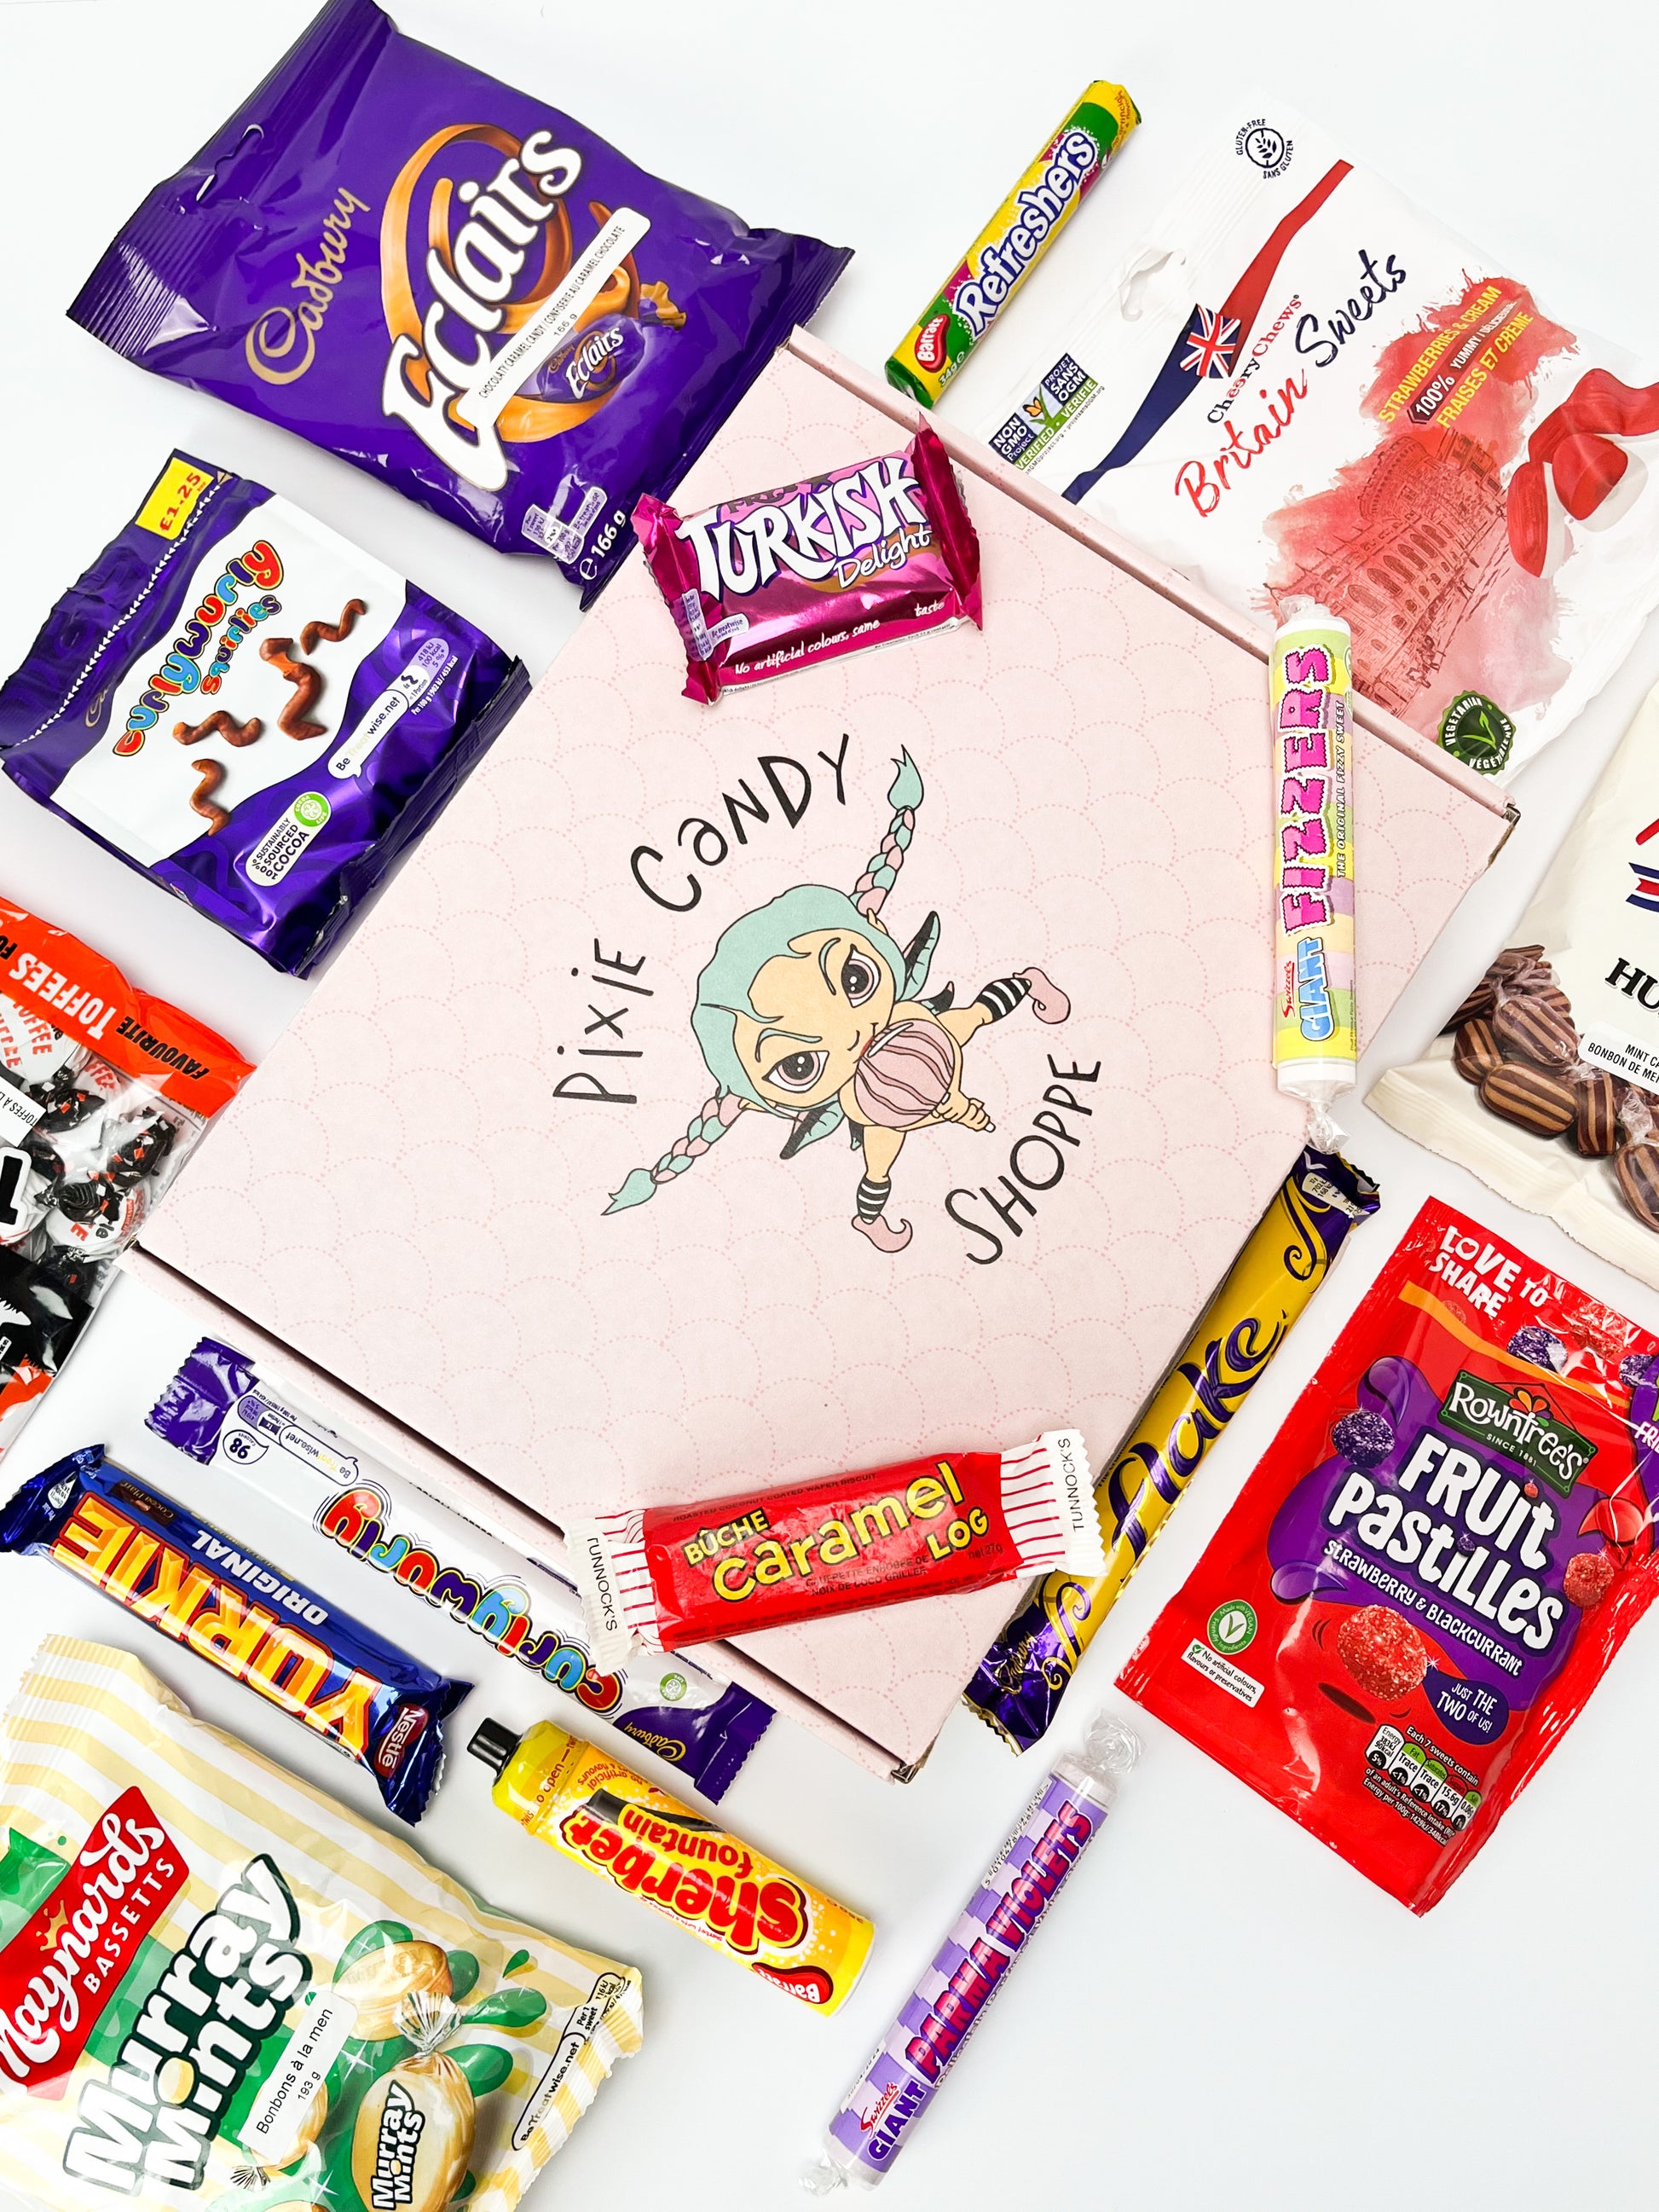 A collection of UK candy and chocolates displayed around and on a pixie candy branded gift box viewed from a bird's eye view angle.